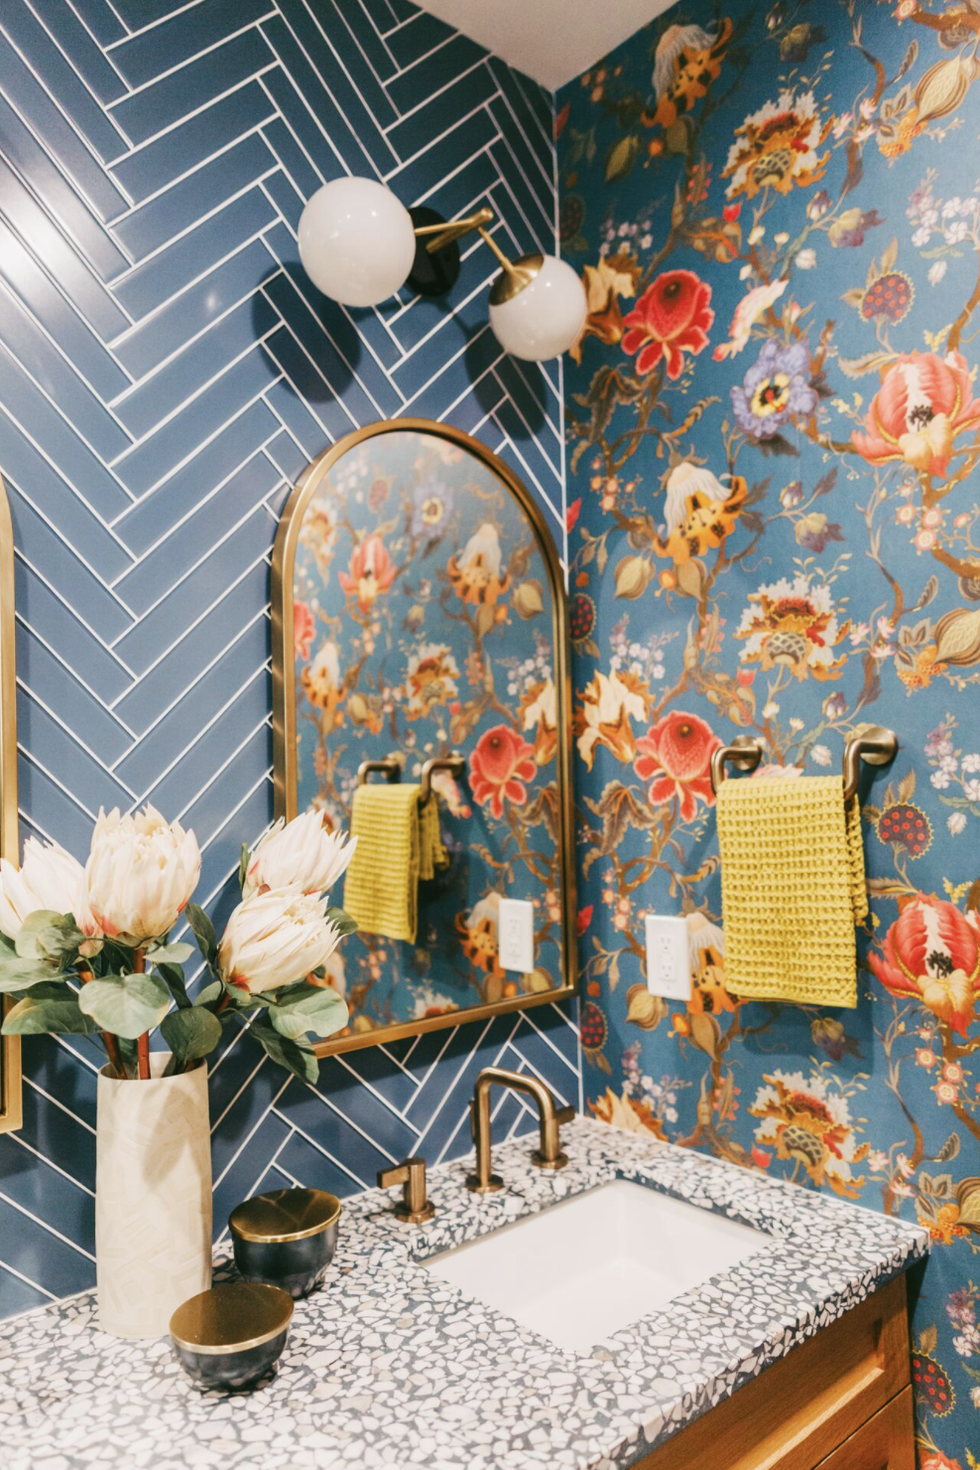 28 Guest Bathroom Ideas to Make Guests Feel Welcome